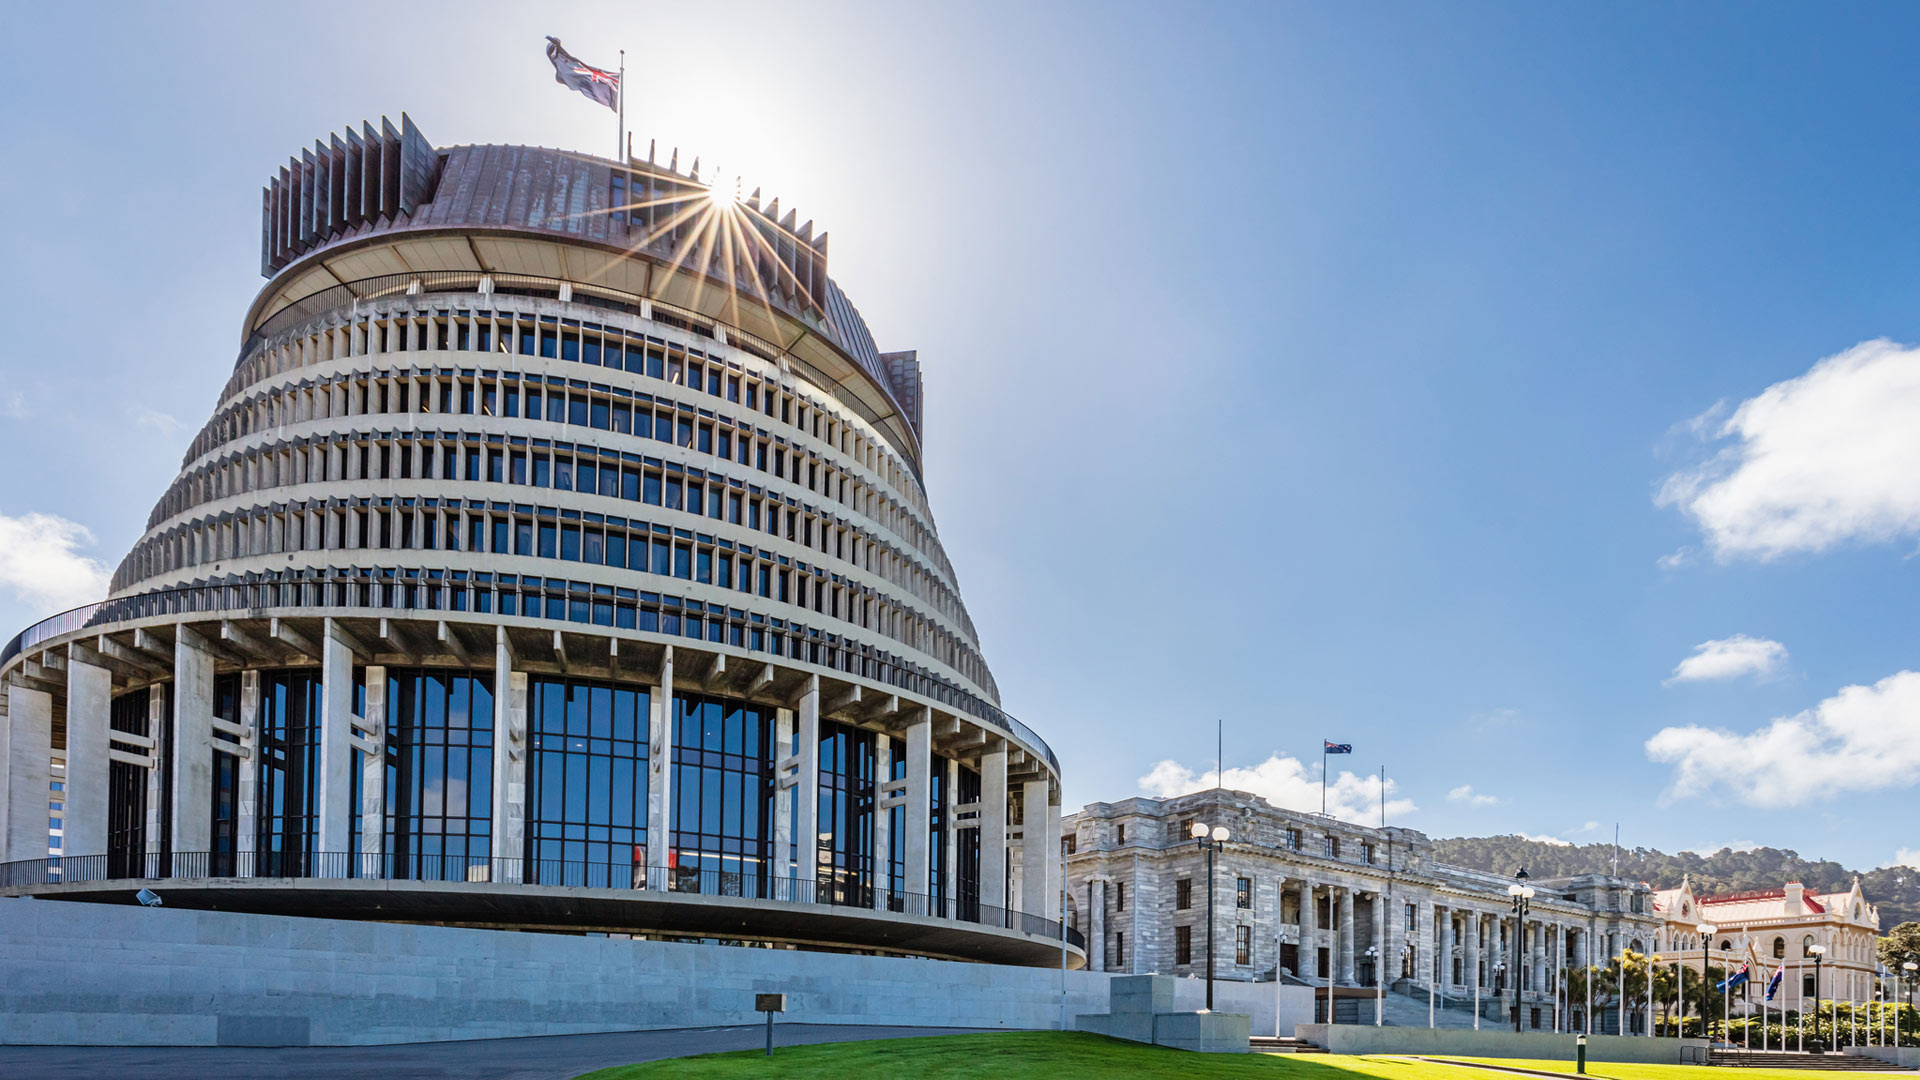 An image of New Zealand's Parliament buildings